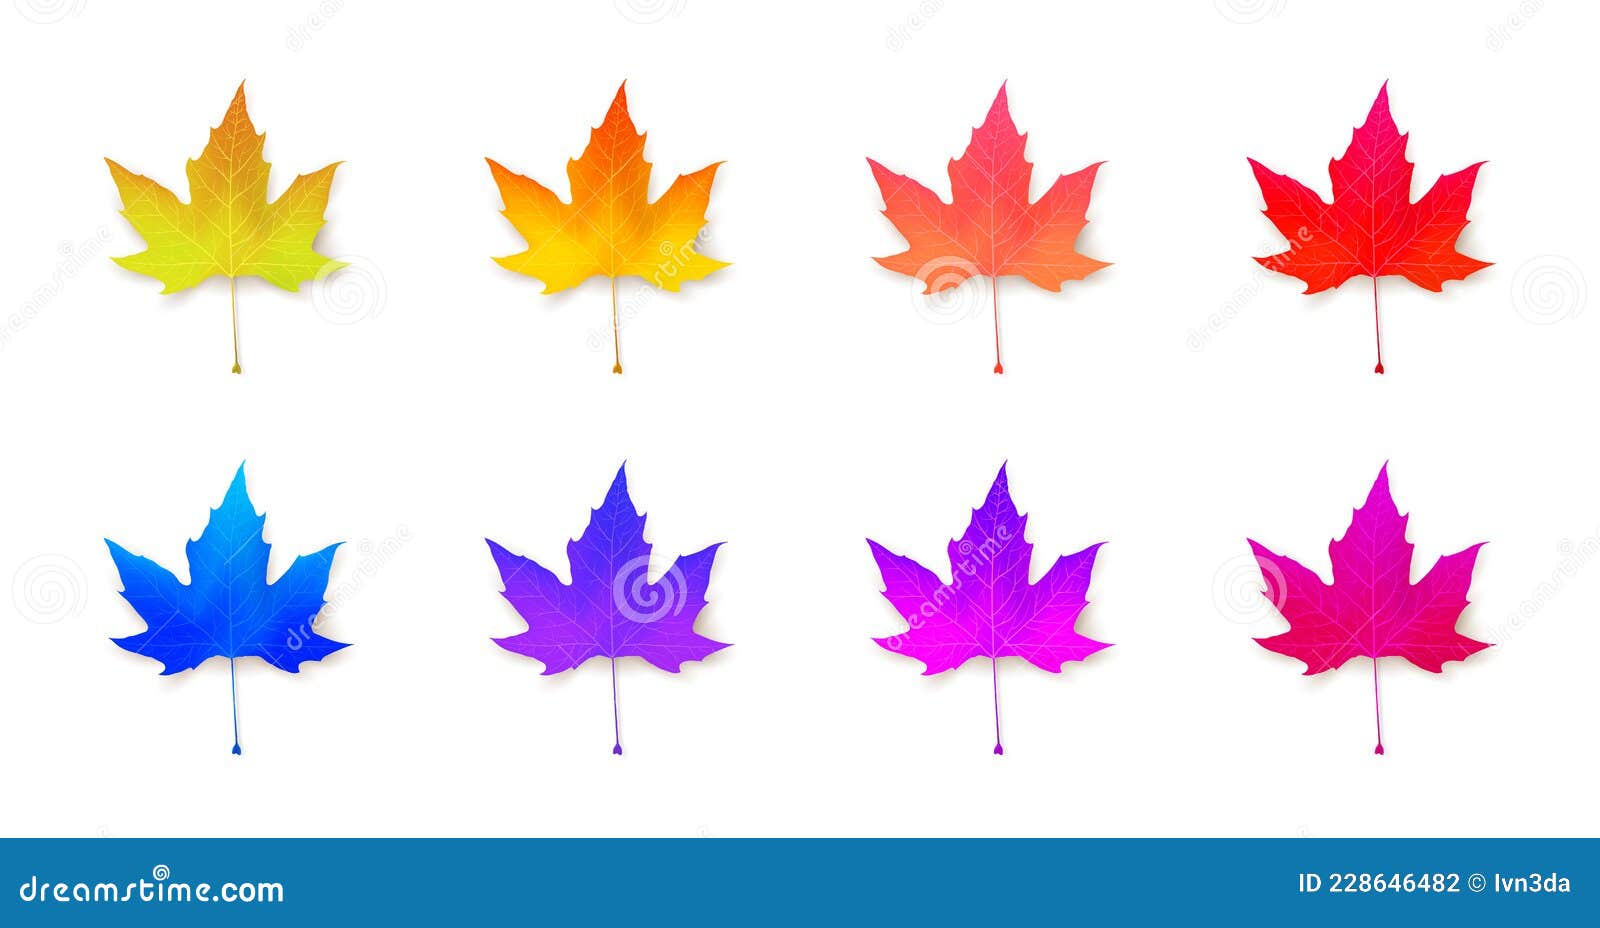 Maple leaves icon set isolated on white. Seasonal clipart in vivid